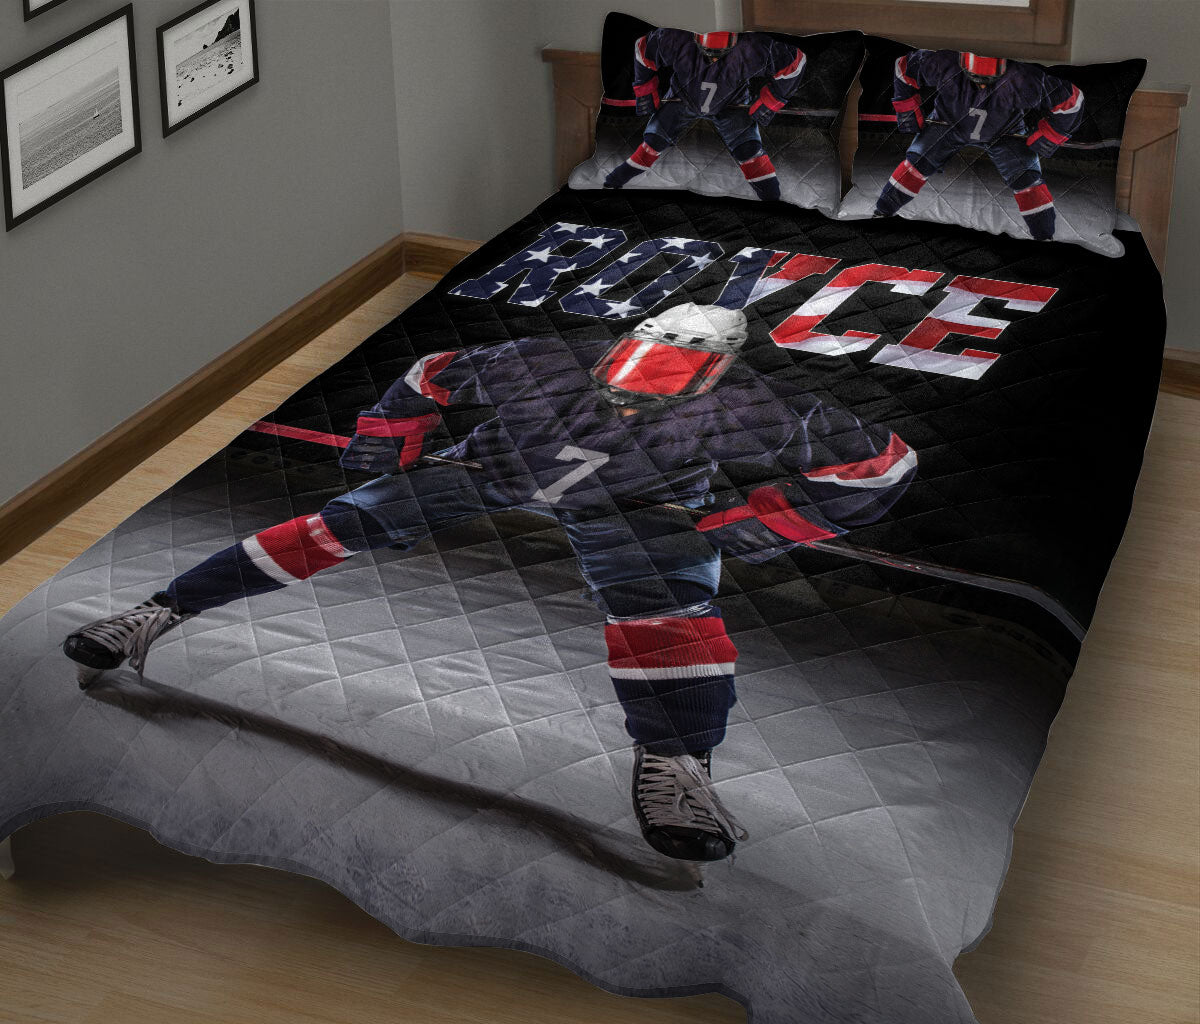 Ohaprints-Quilt-Bed-Set-Pillowcase-America-Us-Flag-Hockey-Player-Lover-Gift-Black-Custom-Personalized-Name-Number-Blanket-Bedspread-Bedding-2664-King (90'' x 100'')